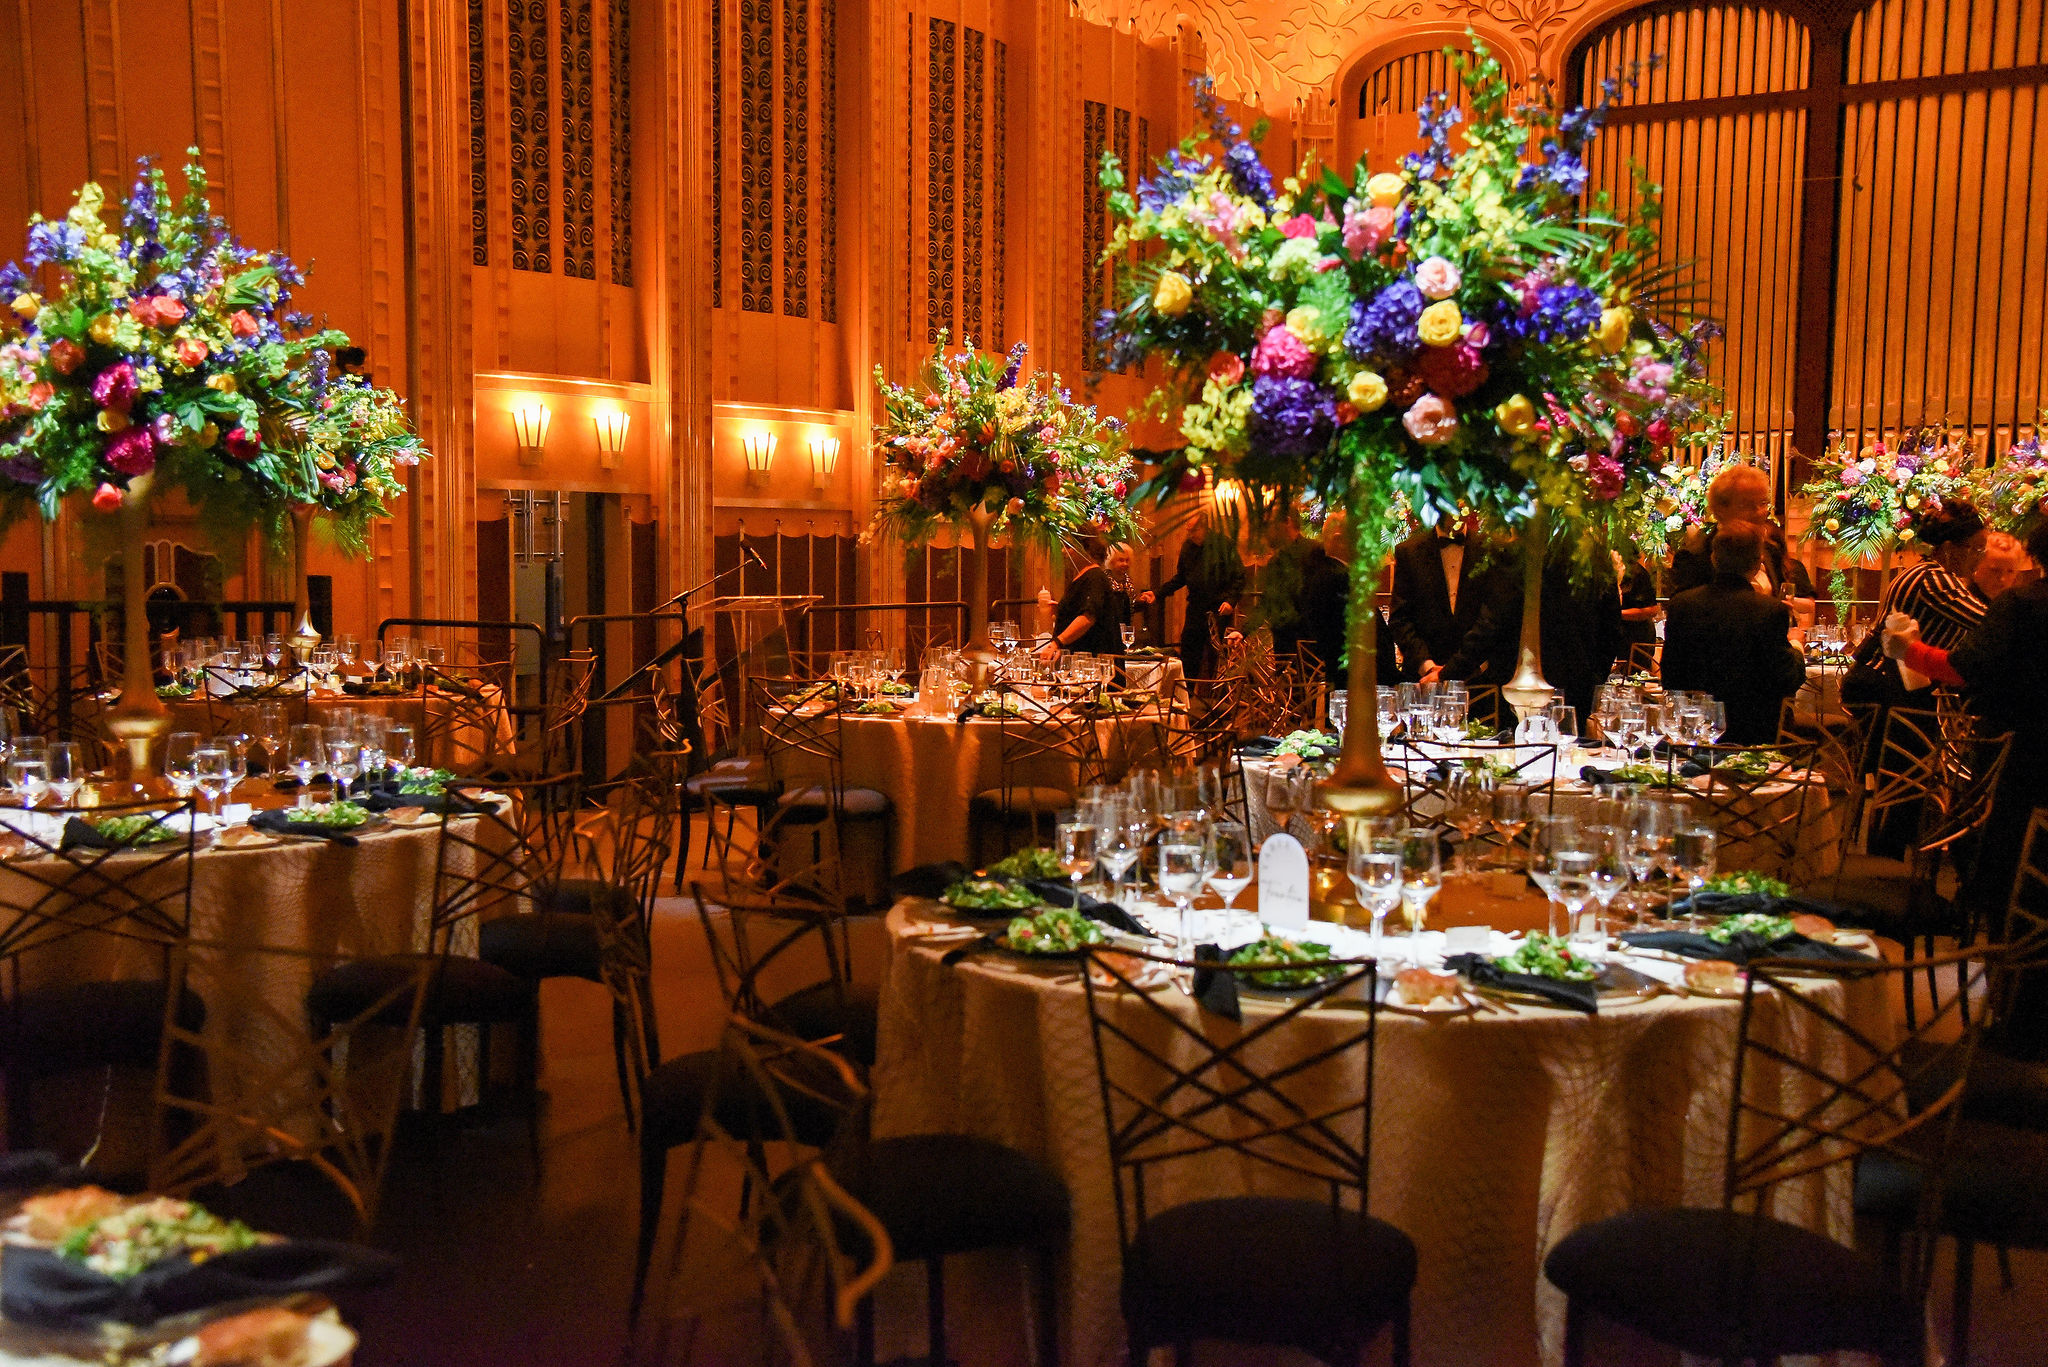 The Cleveland Orchestra Gala Centerpieces on the Concert Hall Stage at Severance Hall, flowers by HeatherLily